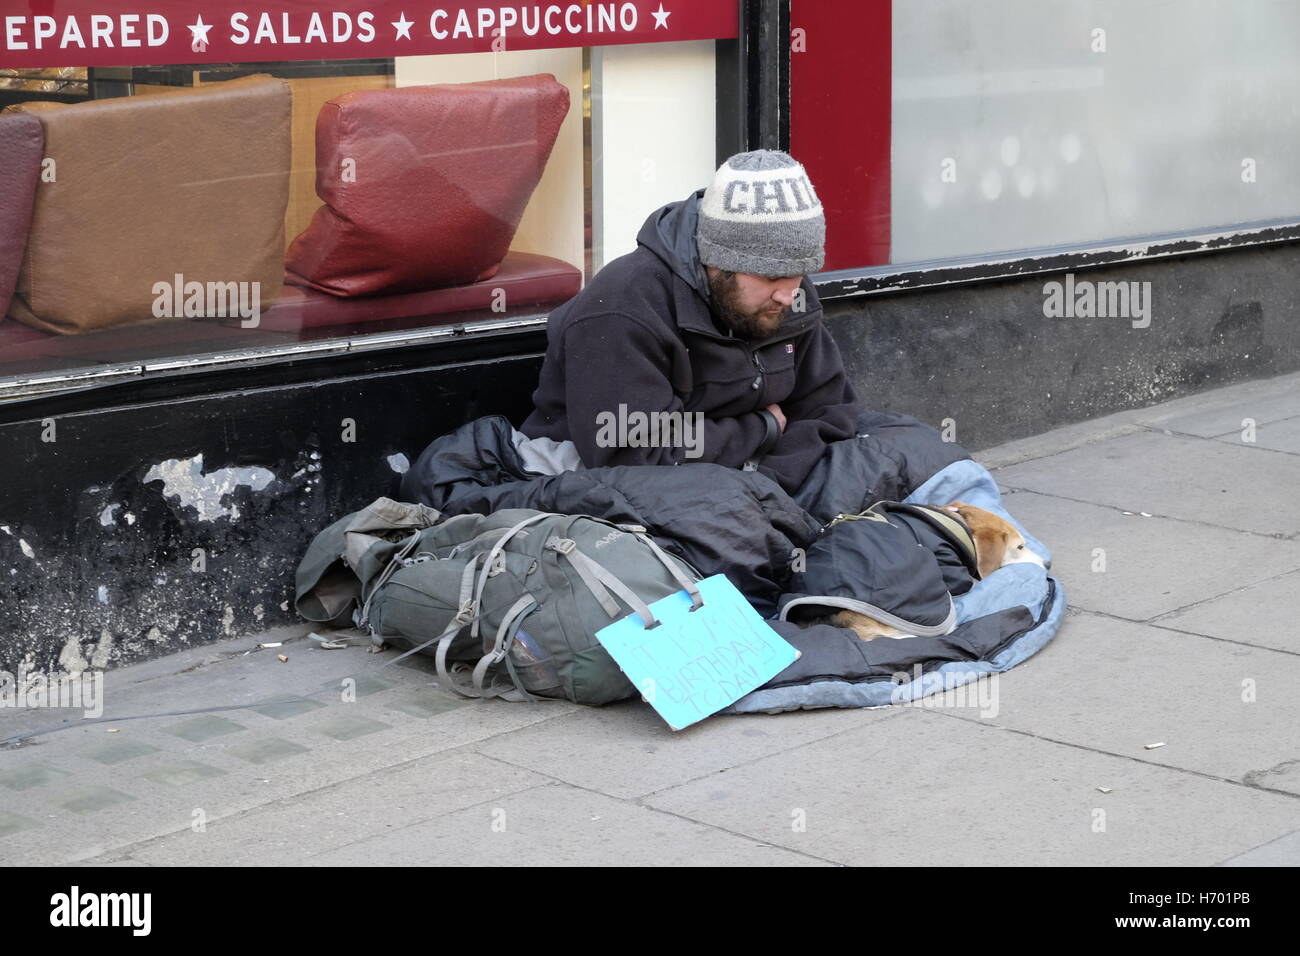 Homeless man in a street outside a cafe. Stock Photo